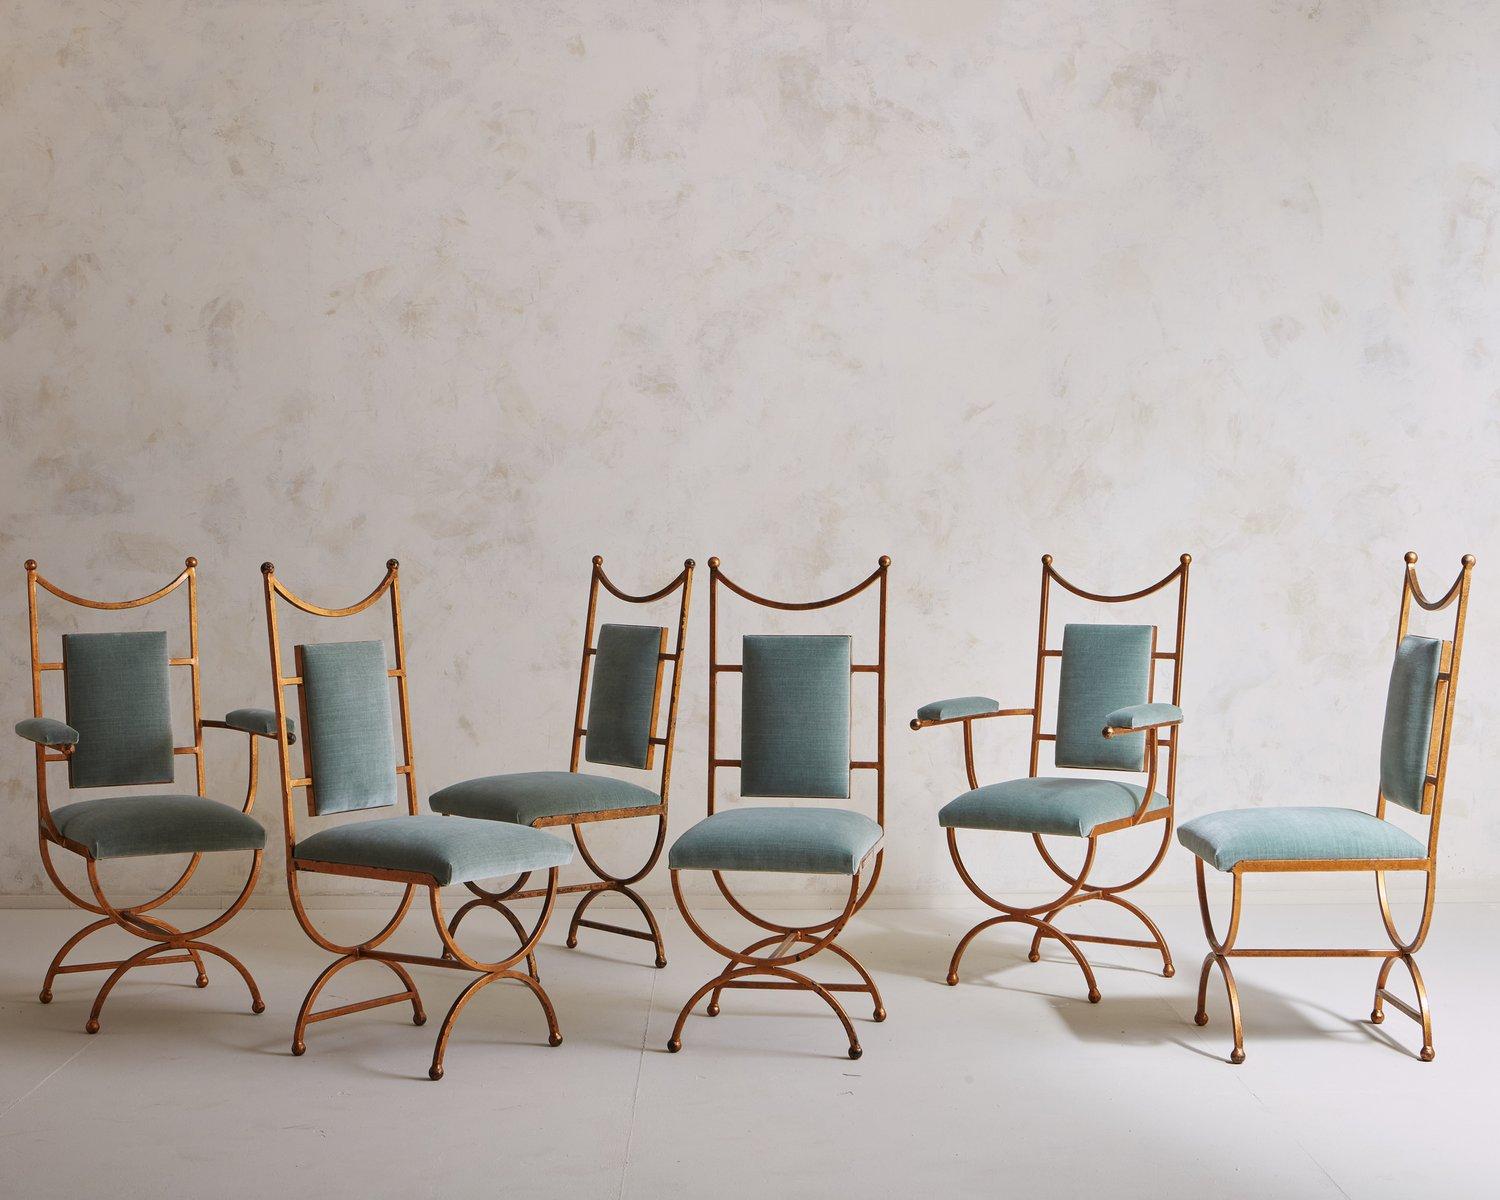 A handsome set of six vintage dining chairs featuring intricate metal frames with a painted brushed gold finish. The frames have high backs with curved lines and petite ball details. These beauties were newly upholstered in a seafoam green velvet